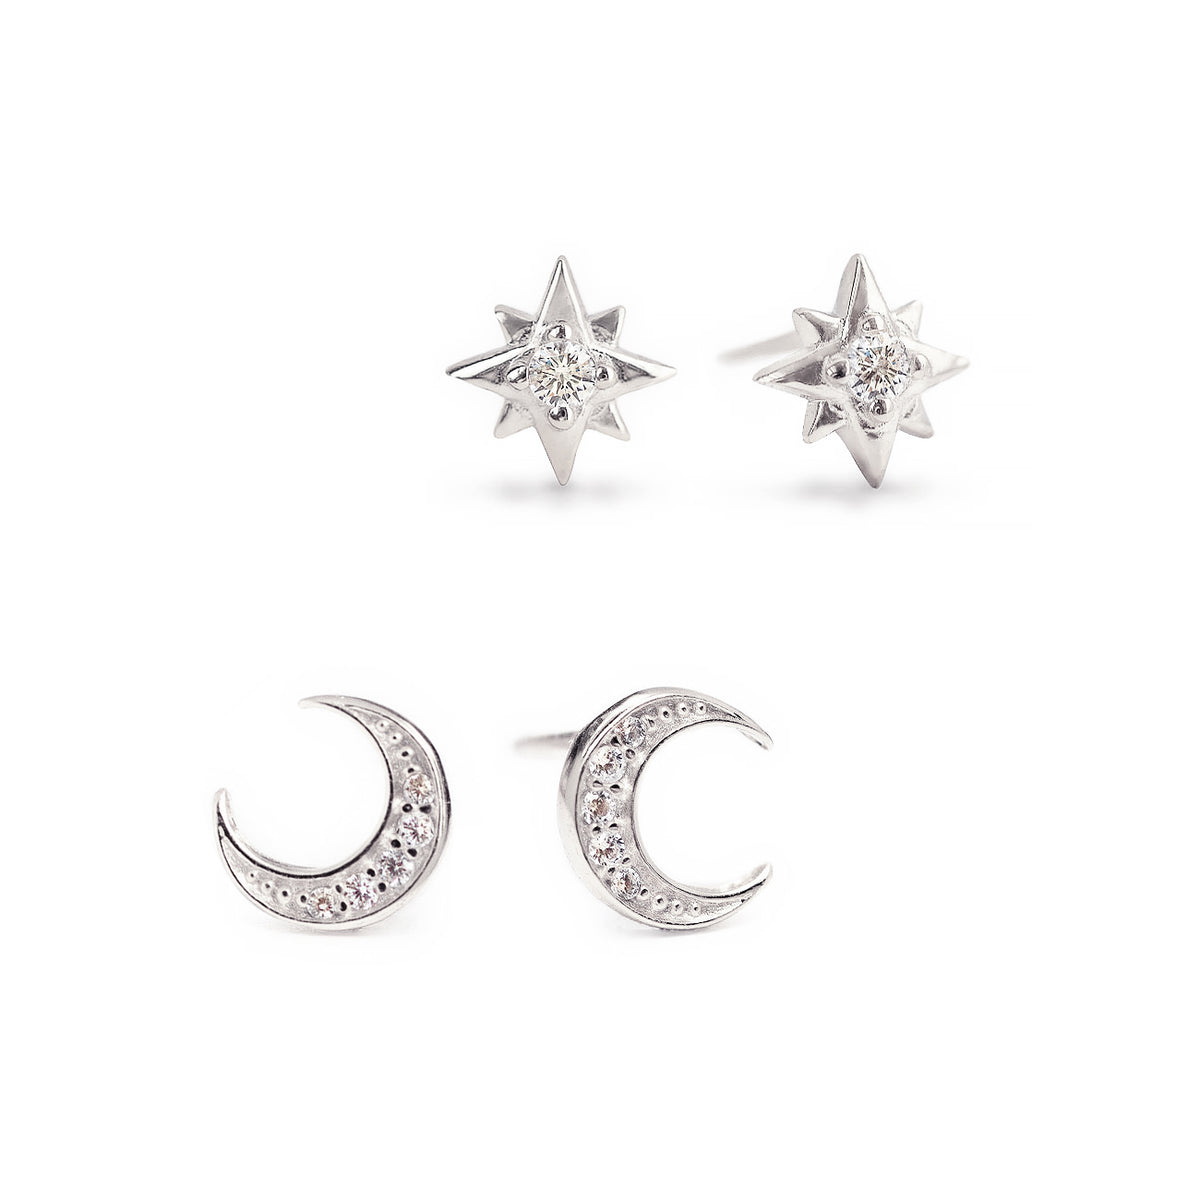 Pavé Crescent Moon and Star Earrings, Small Sterling Silver Earrings ...